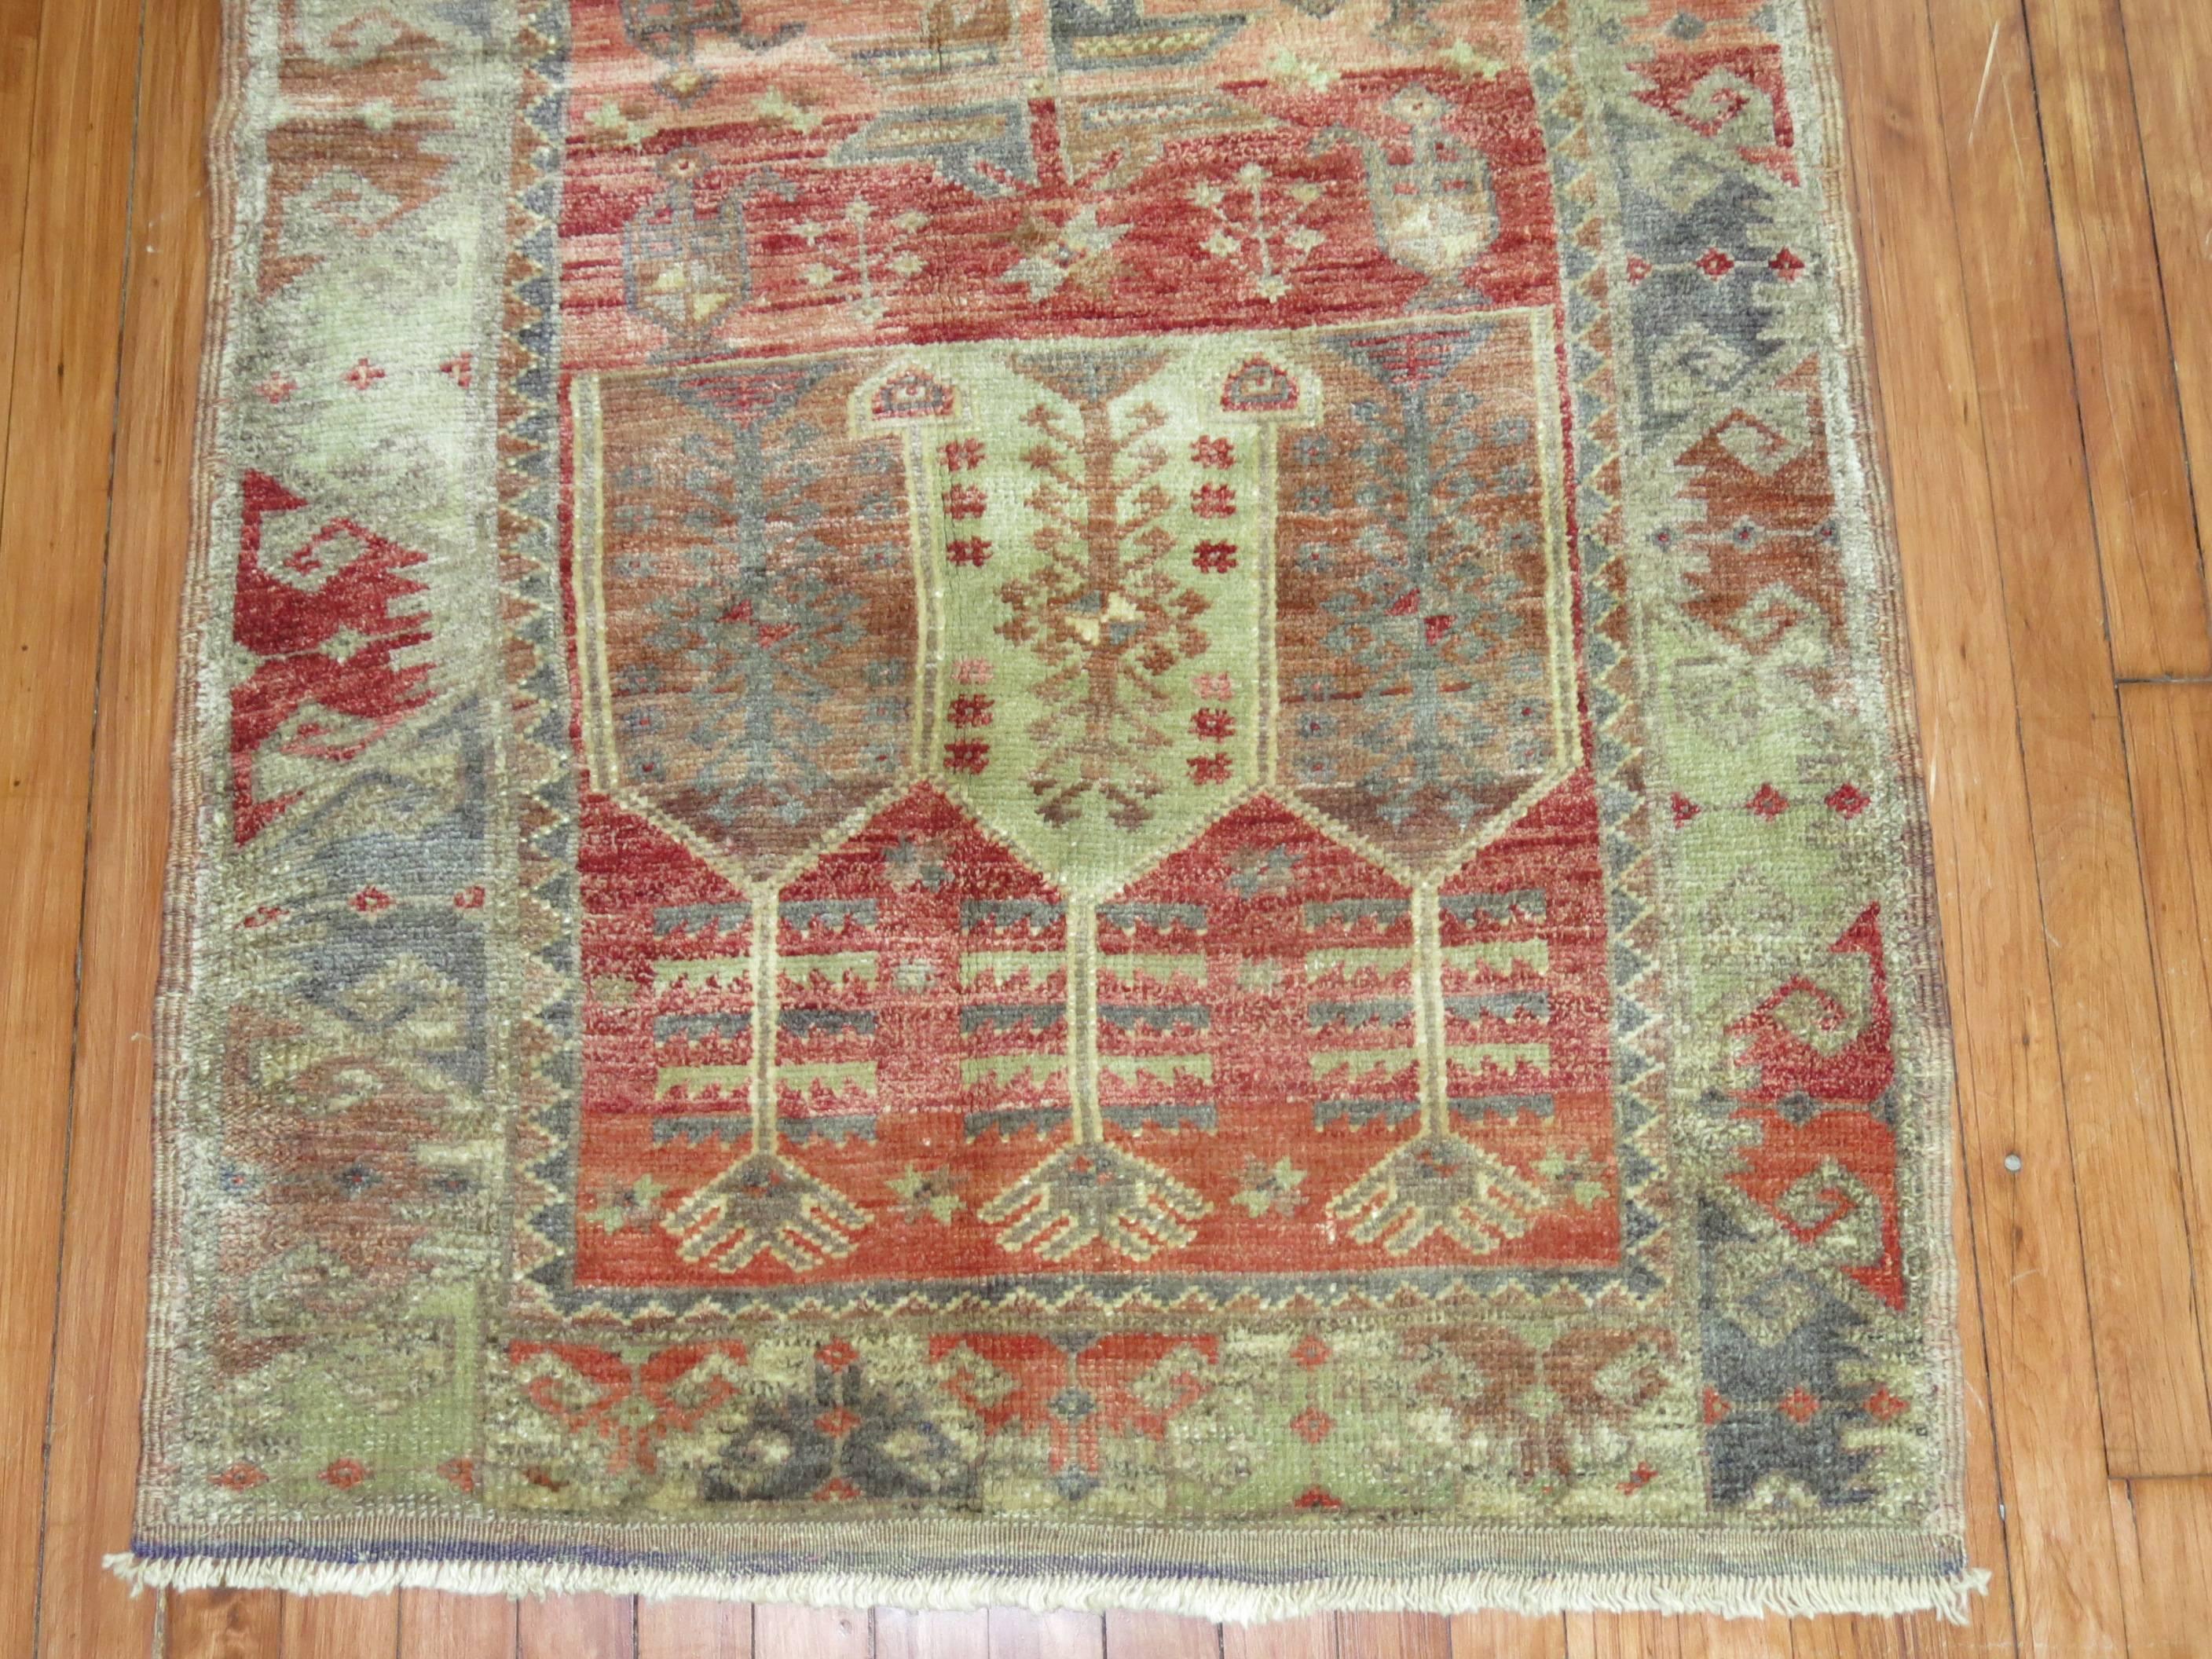 One of a kind midcentury Turkish Anatolian throw rug. Muted red field, predominant accents in celadon green, gray, blue.

Measures: 3'1” x 5'7”.